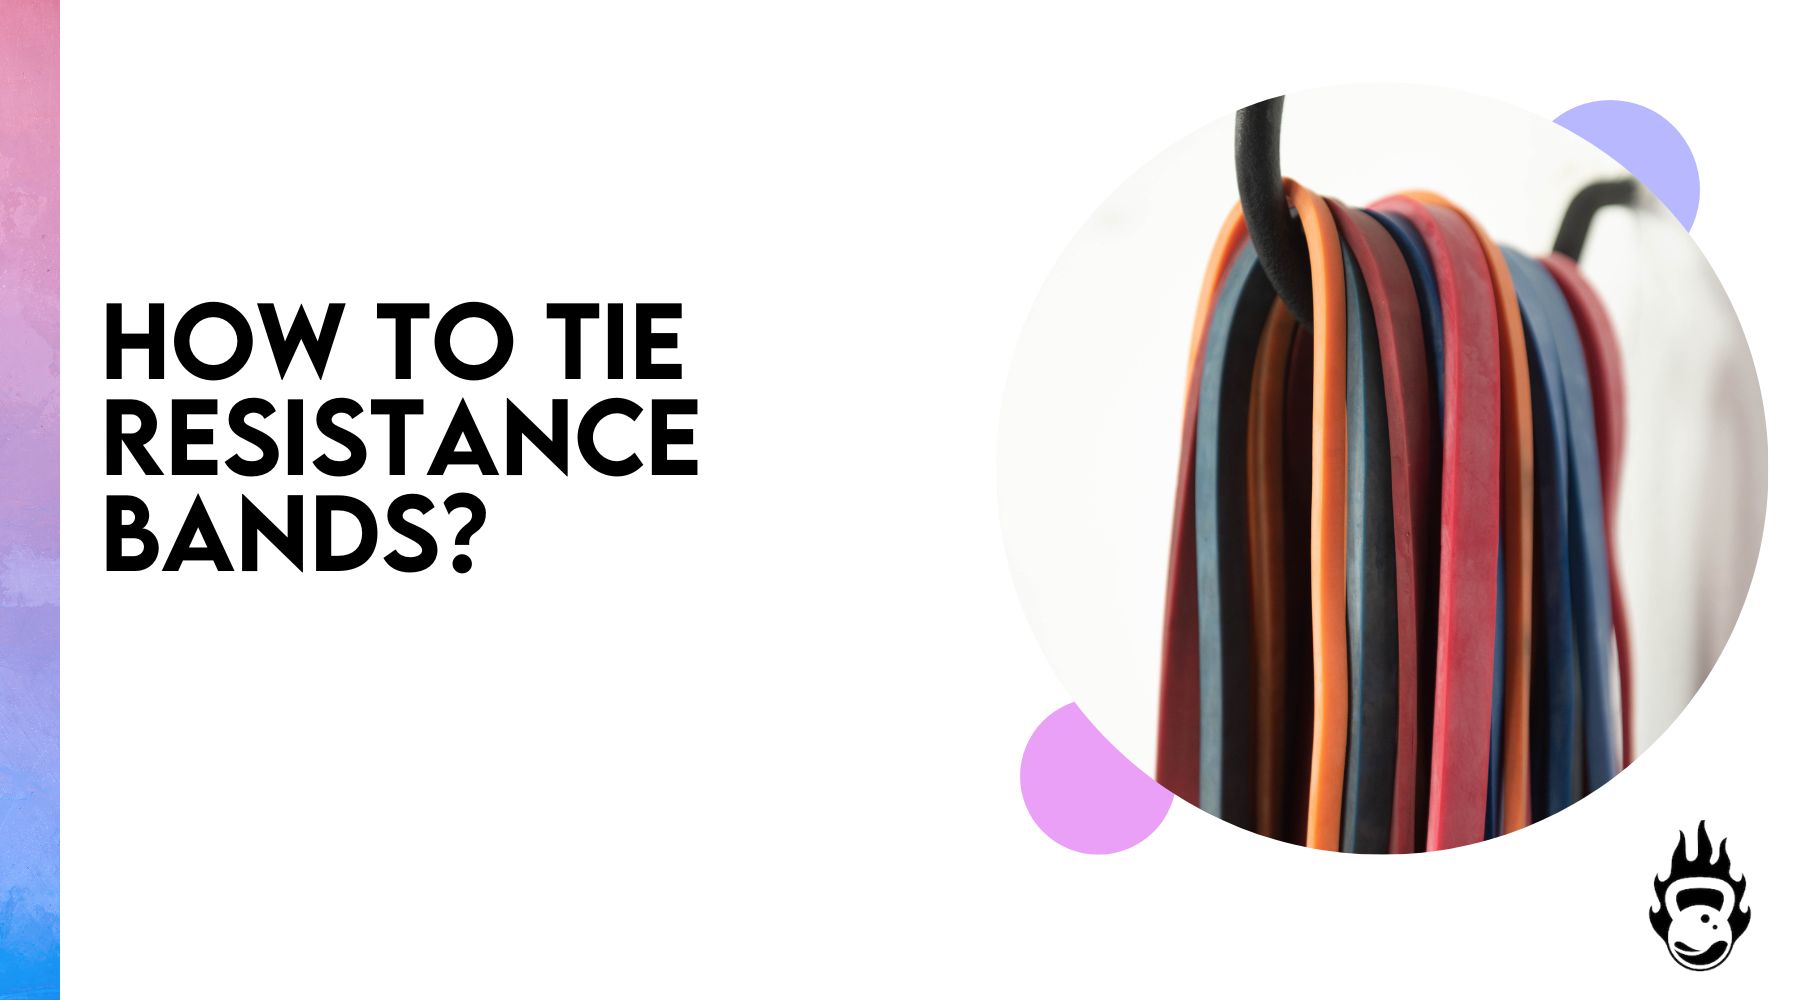 How to tie resistance bands